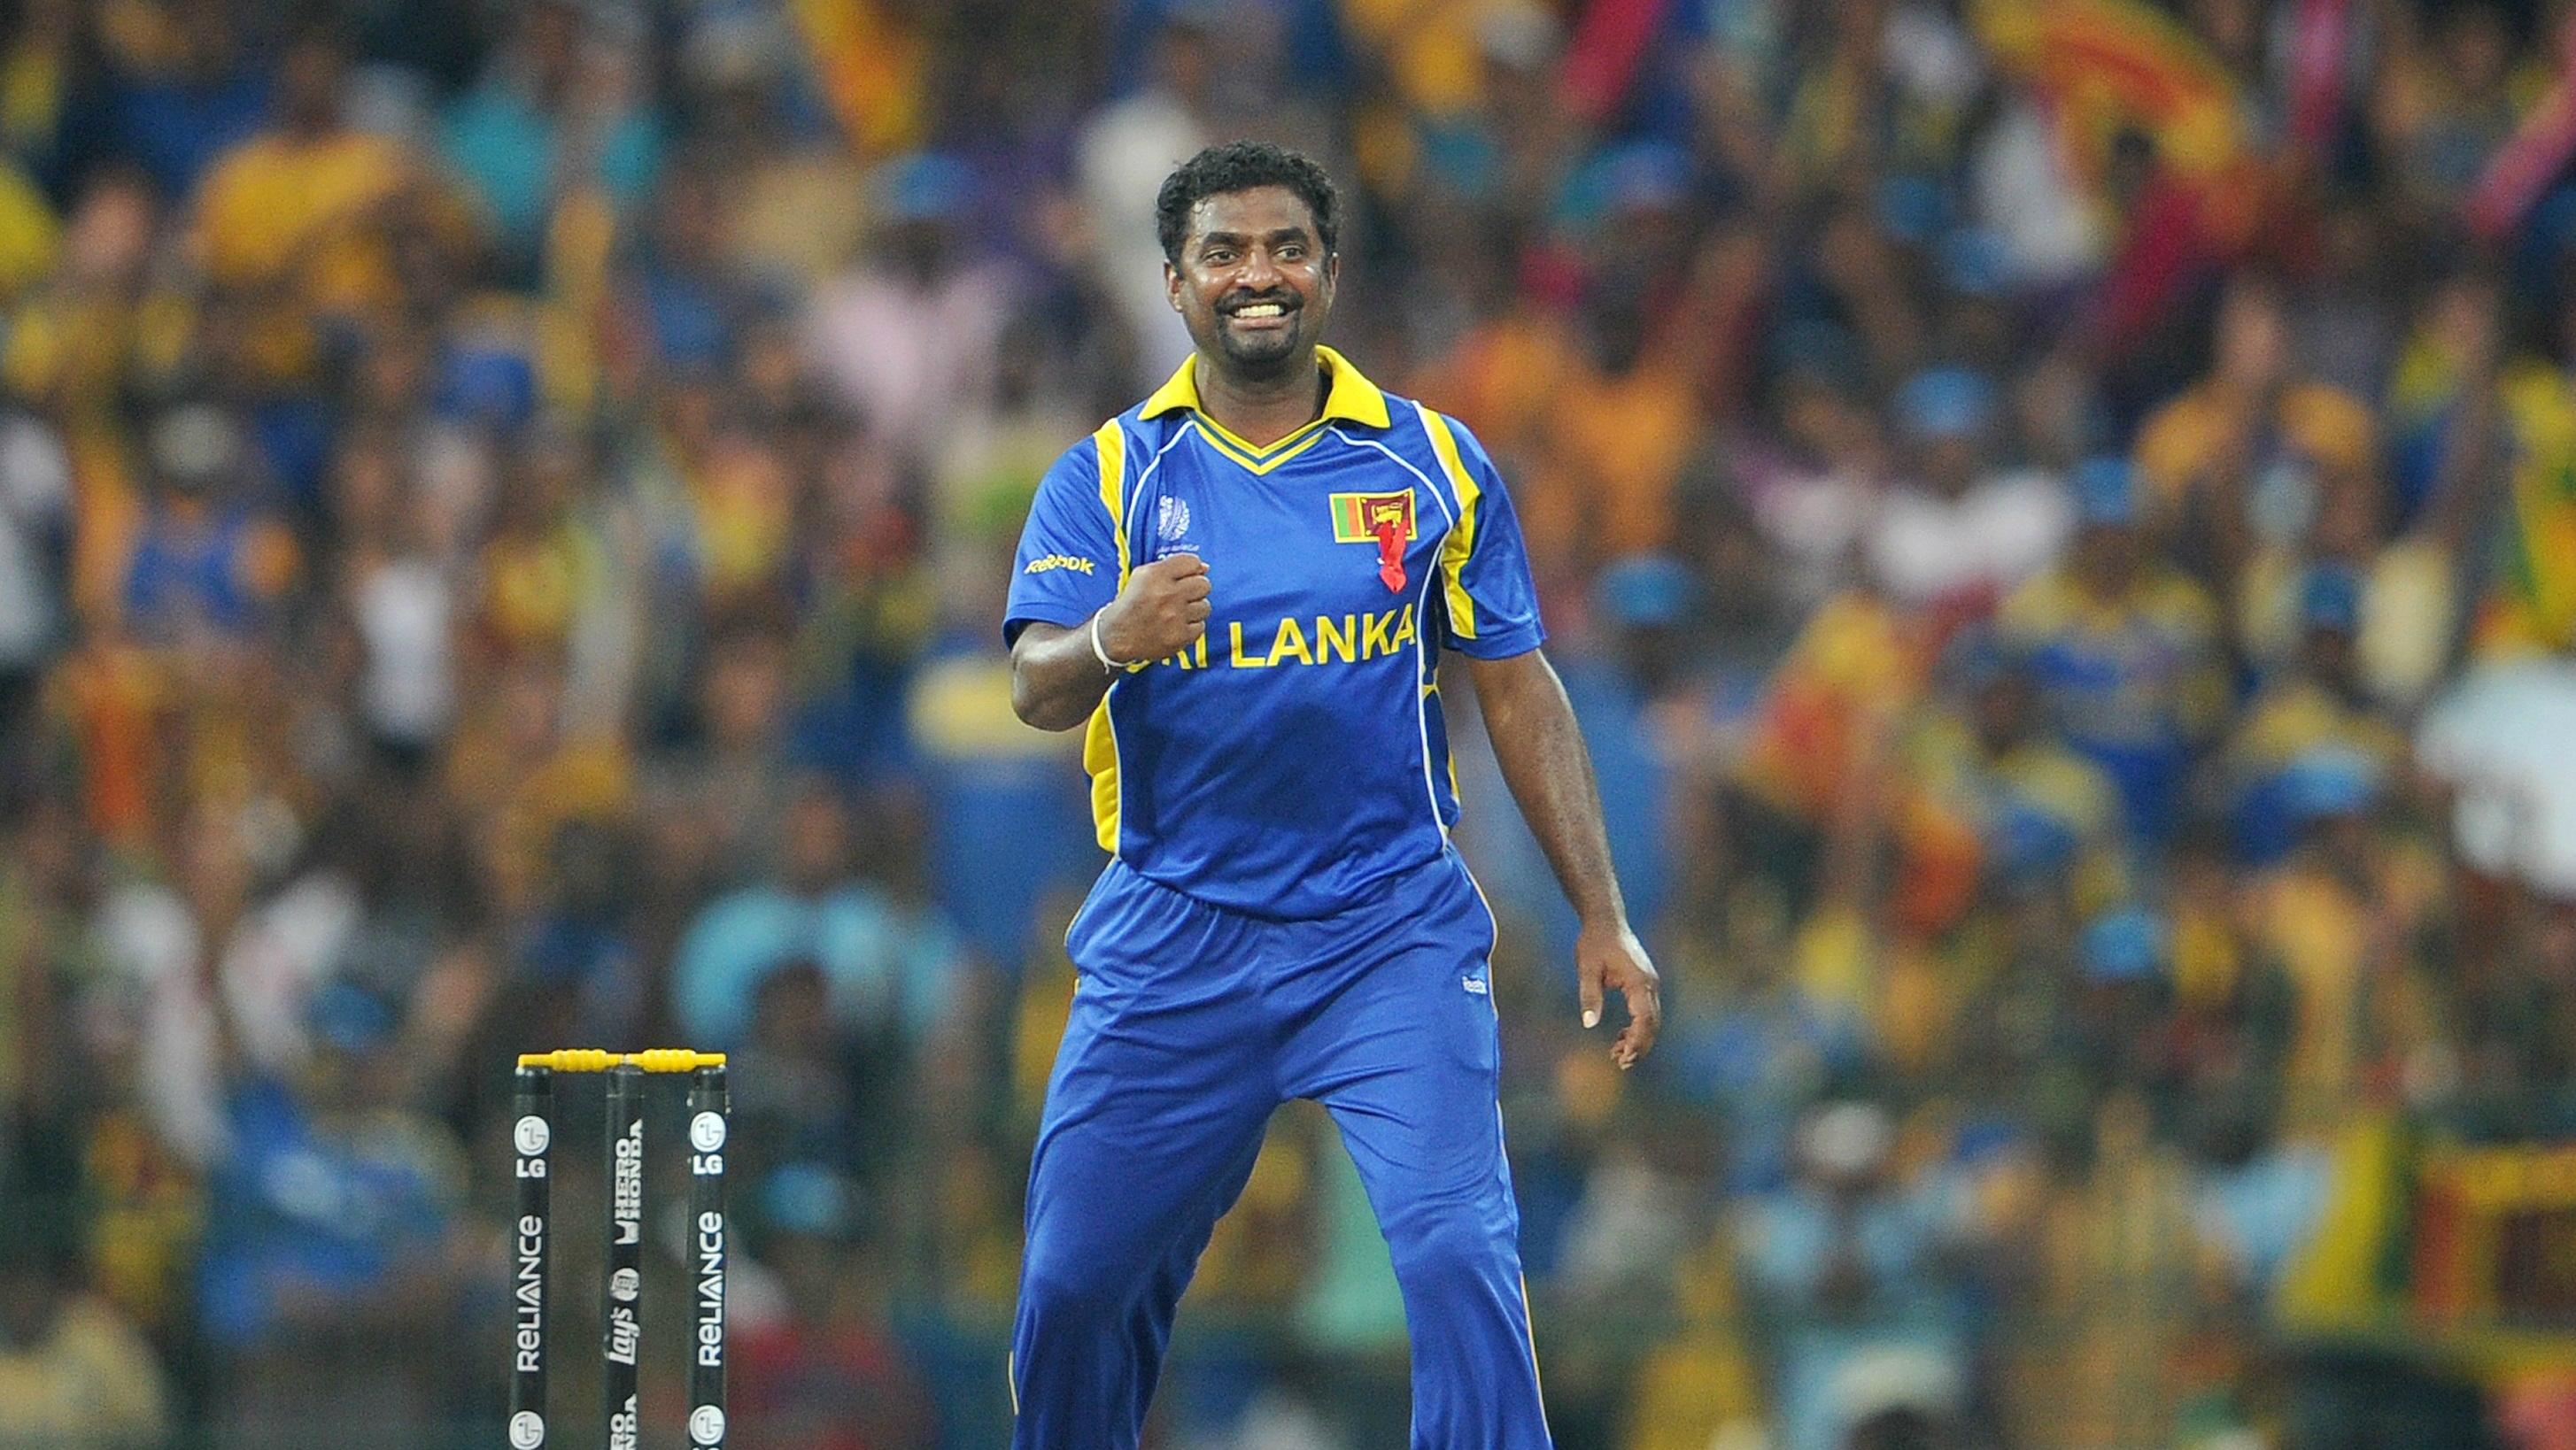 M Muralitharan World Cup Most Wickets In a Series